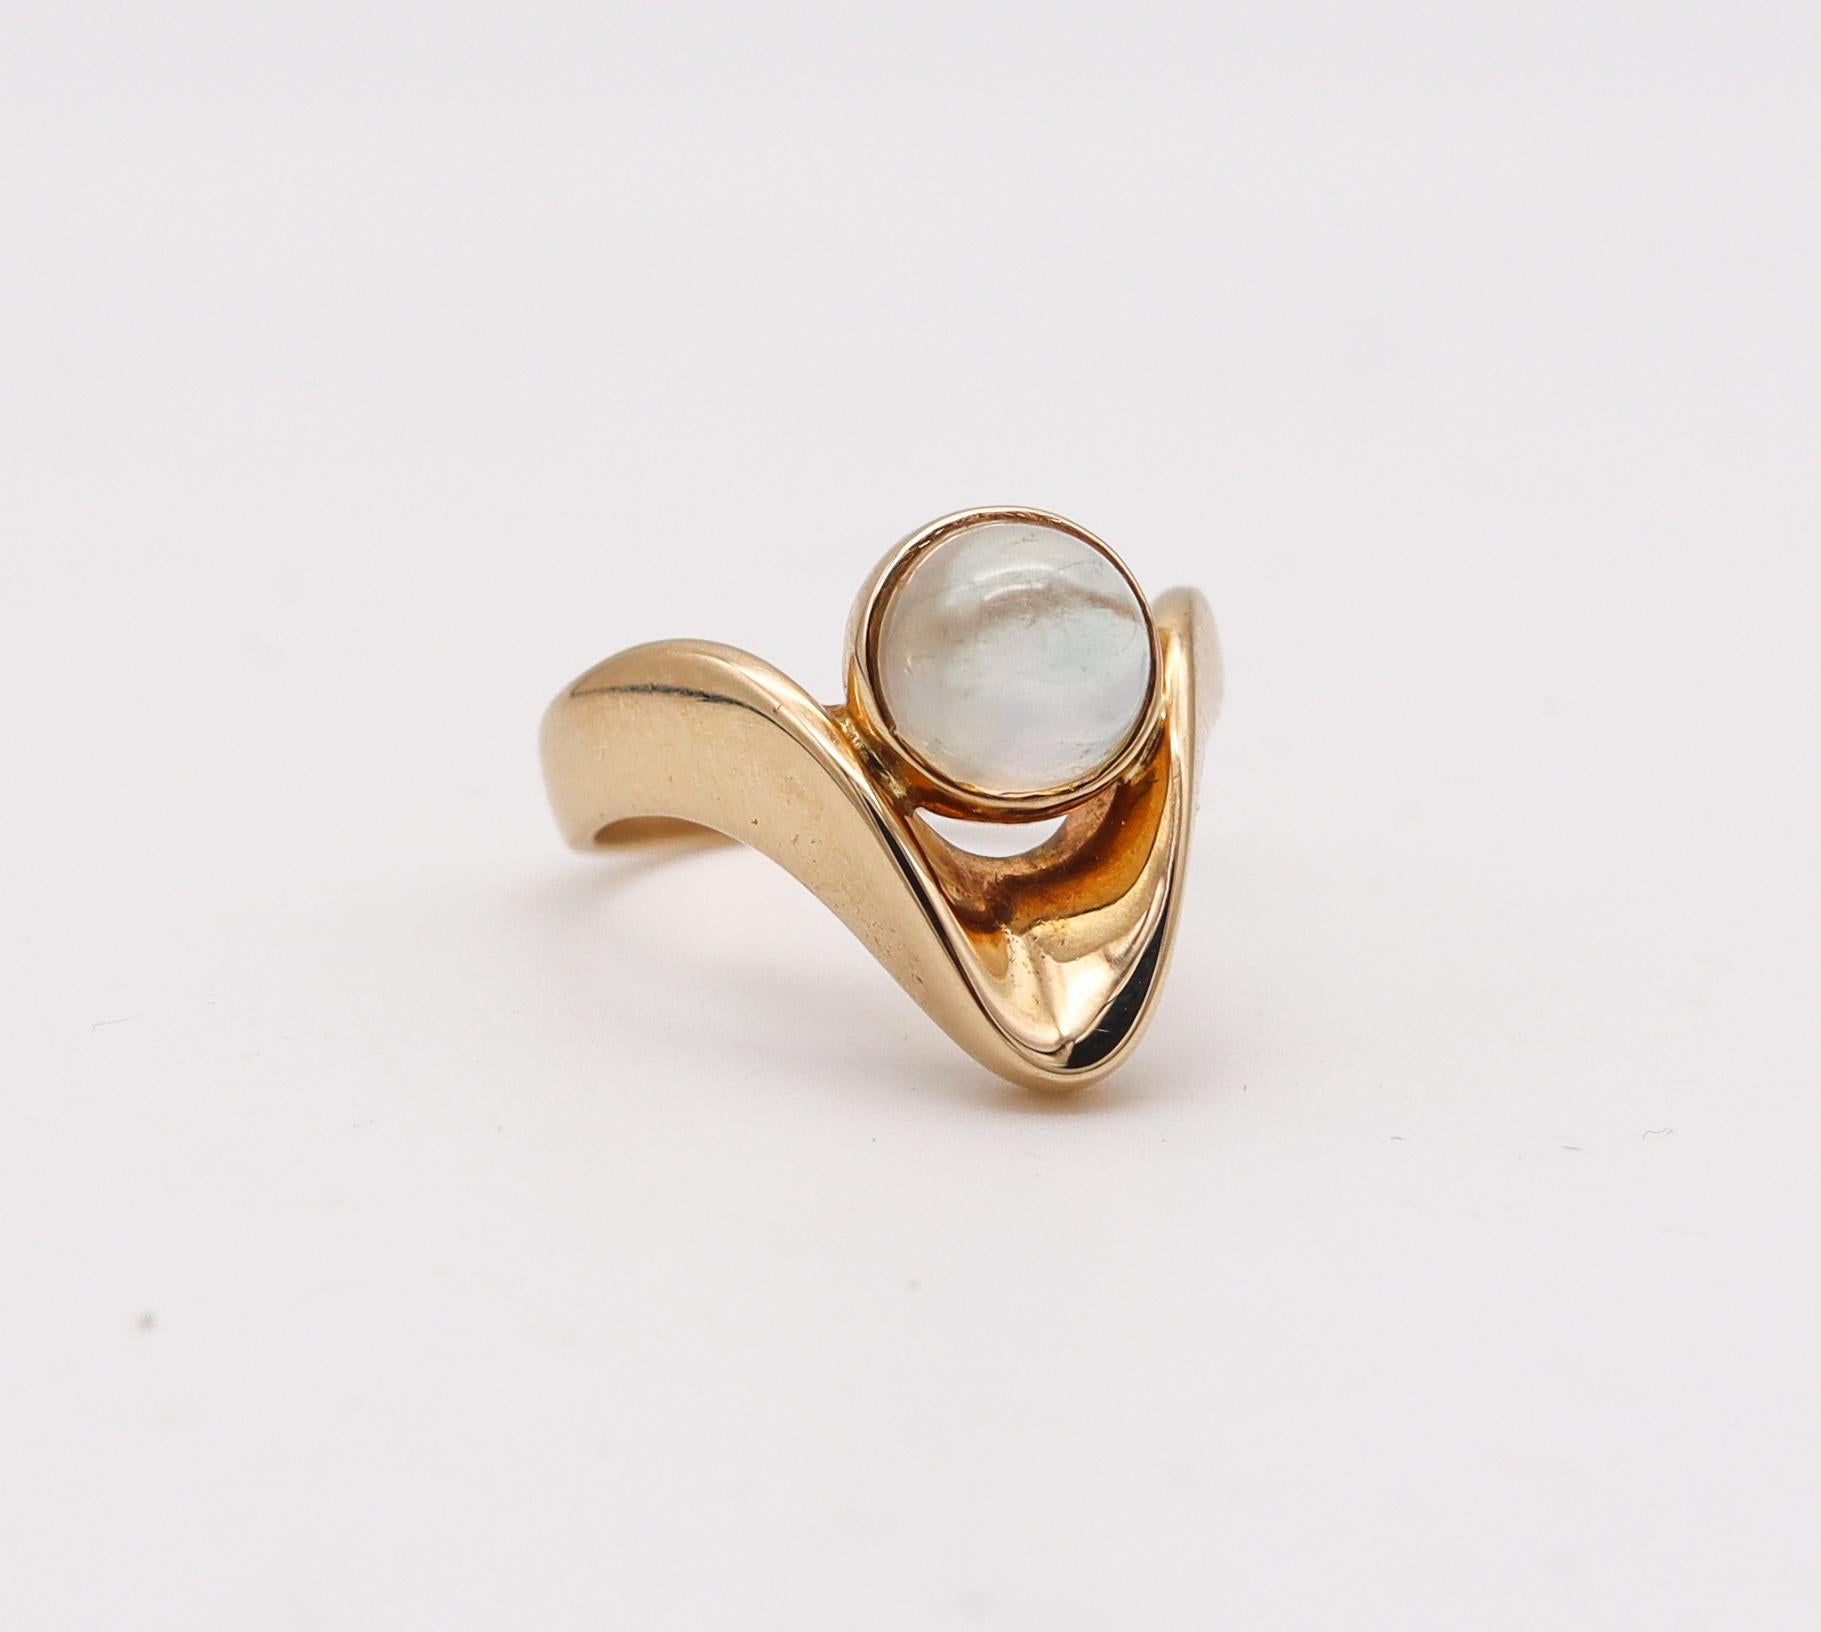 Scandinavian sculptural free form ring.

A sculptural modernist ring, created in Denmark during the late mid century period back in the 1960. This piece has been crafted with wavy free form in solid yellow gold of 14 karats with high polished